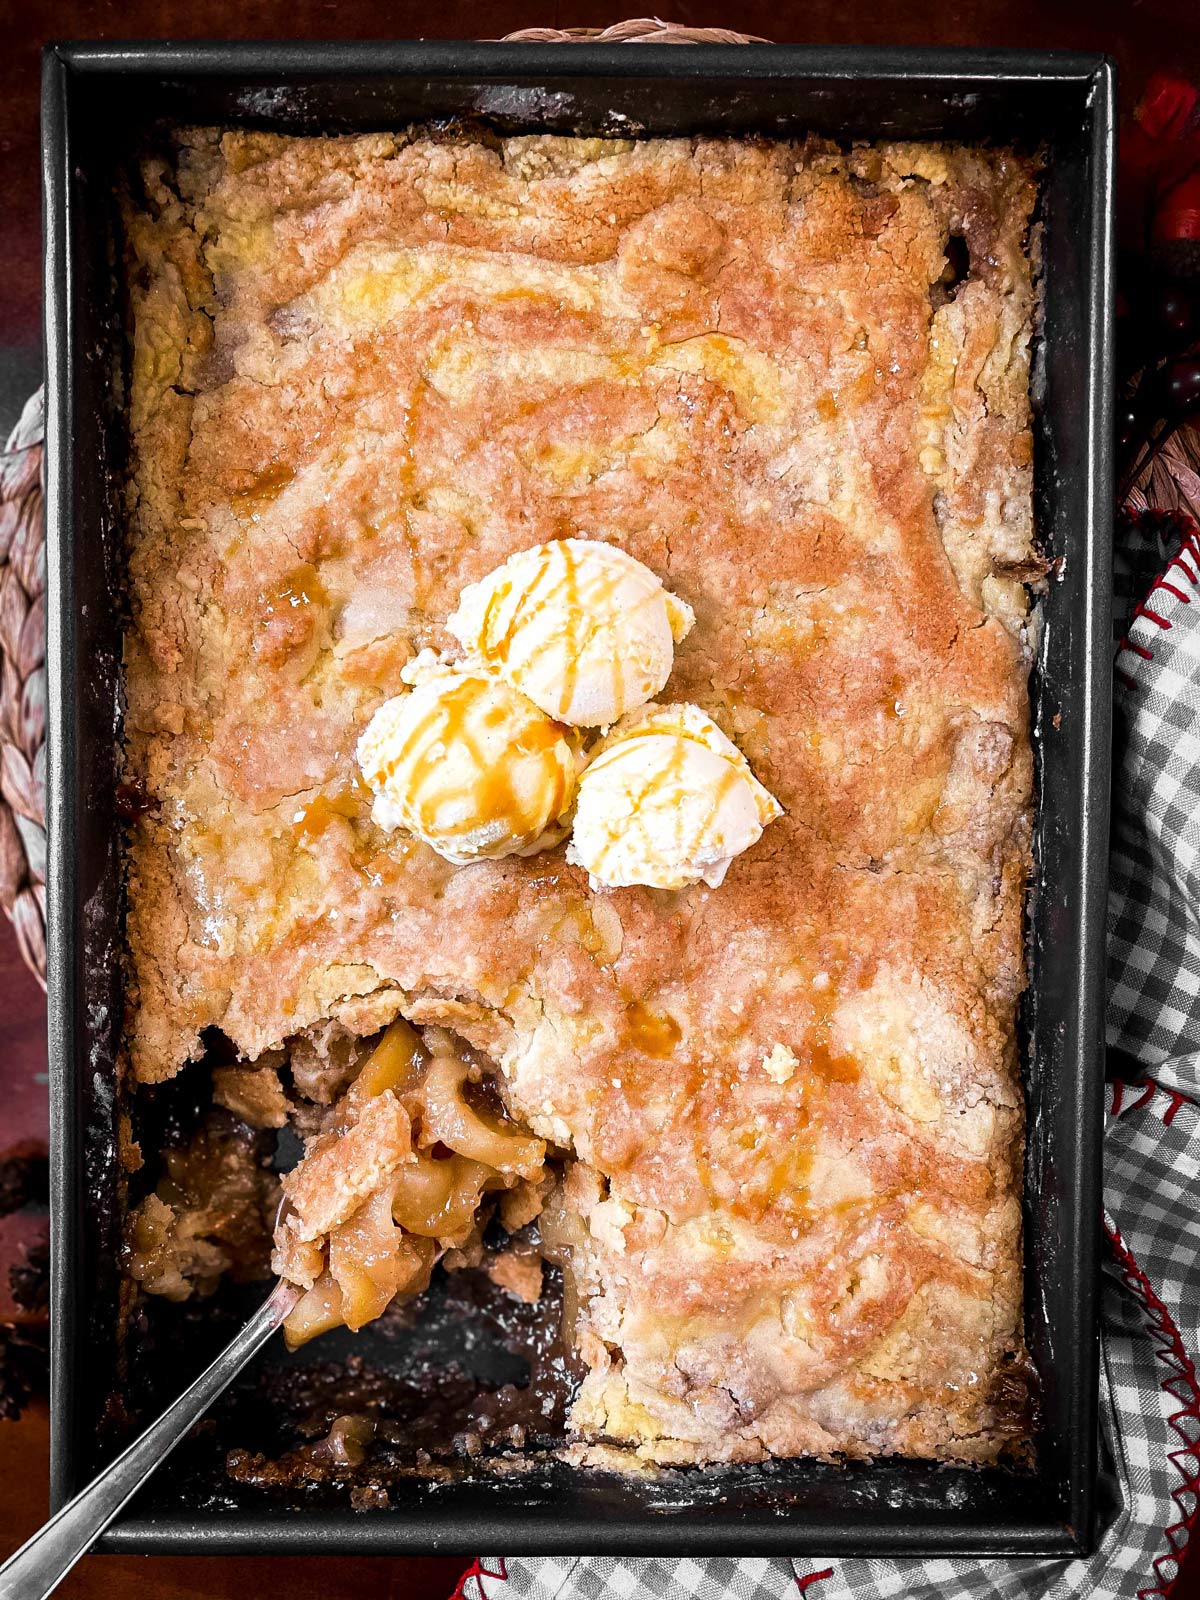 baked apple dump cake in a cake pan with ice cream